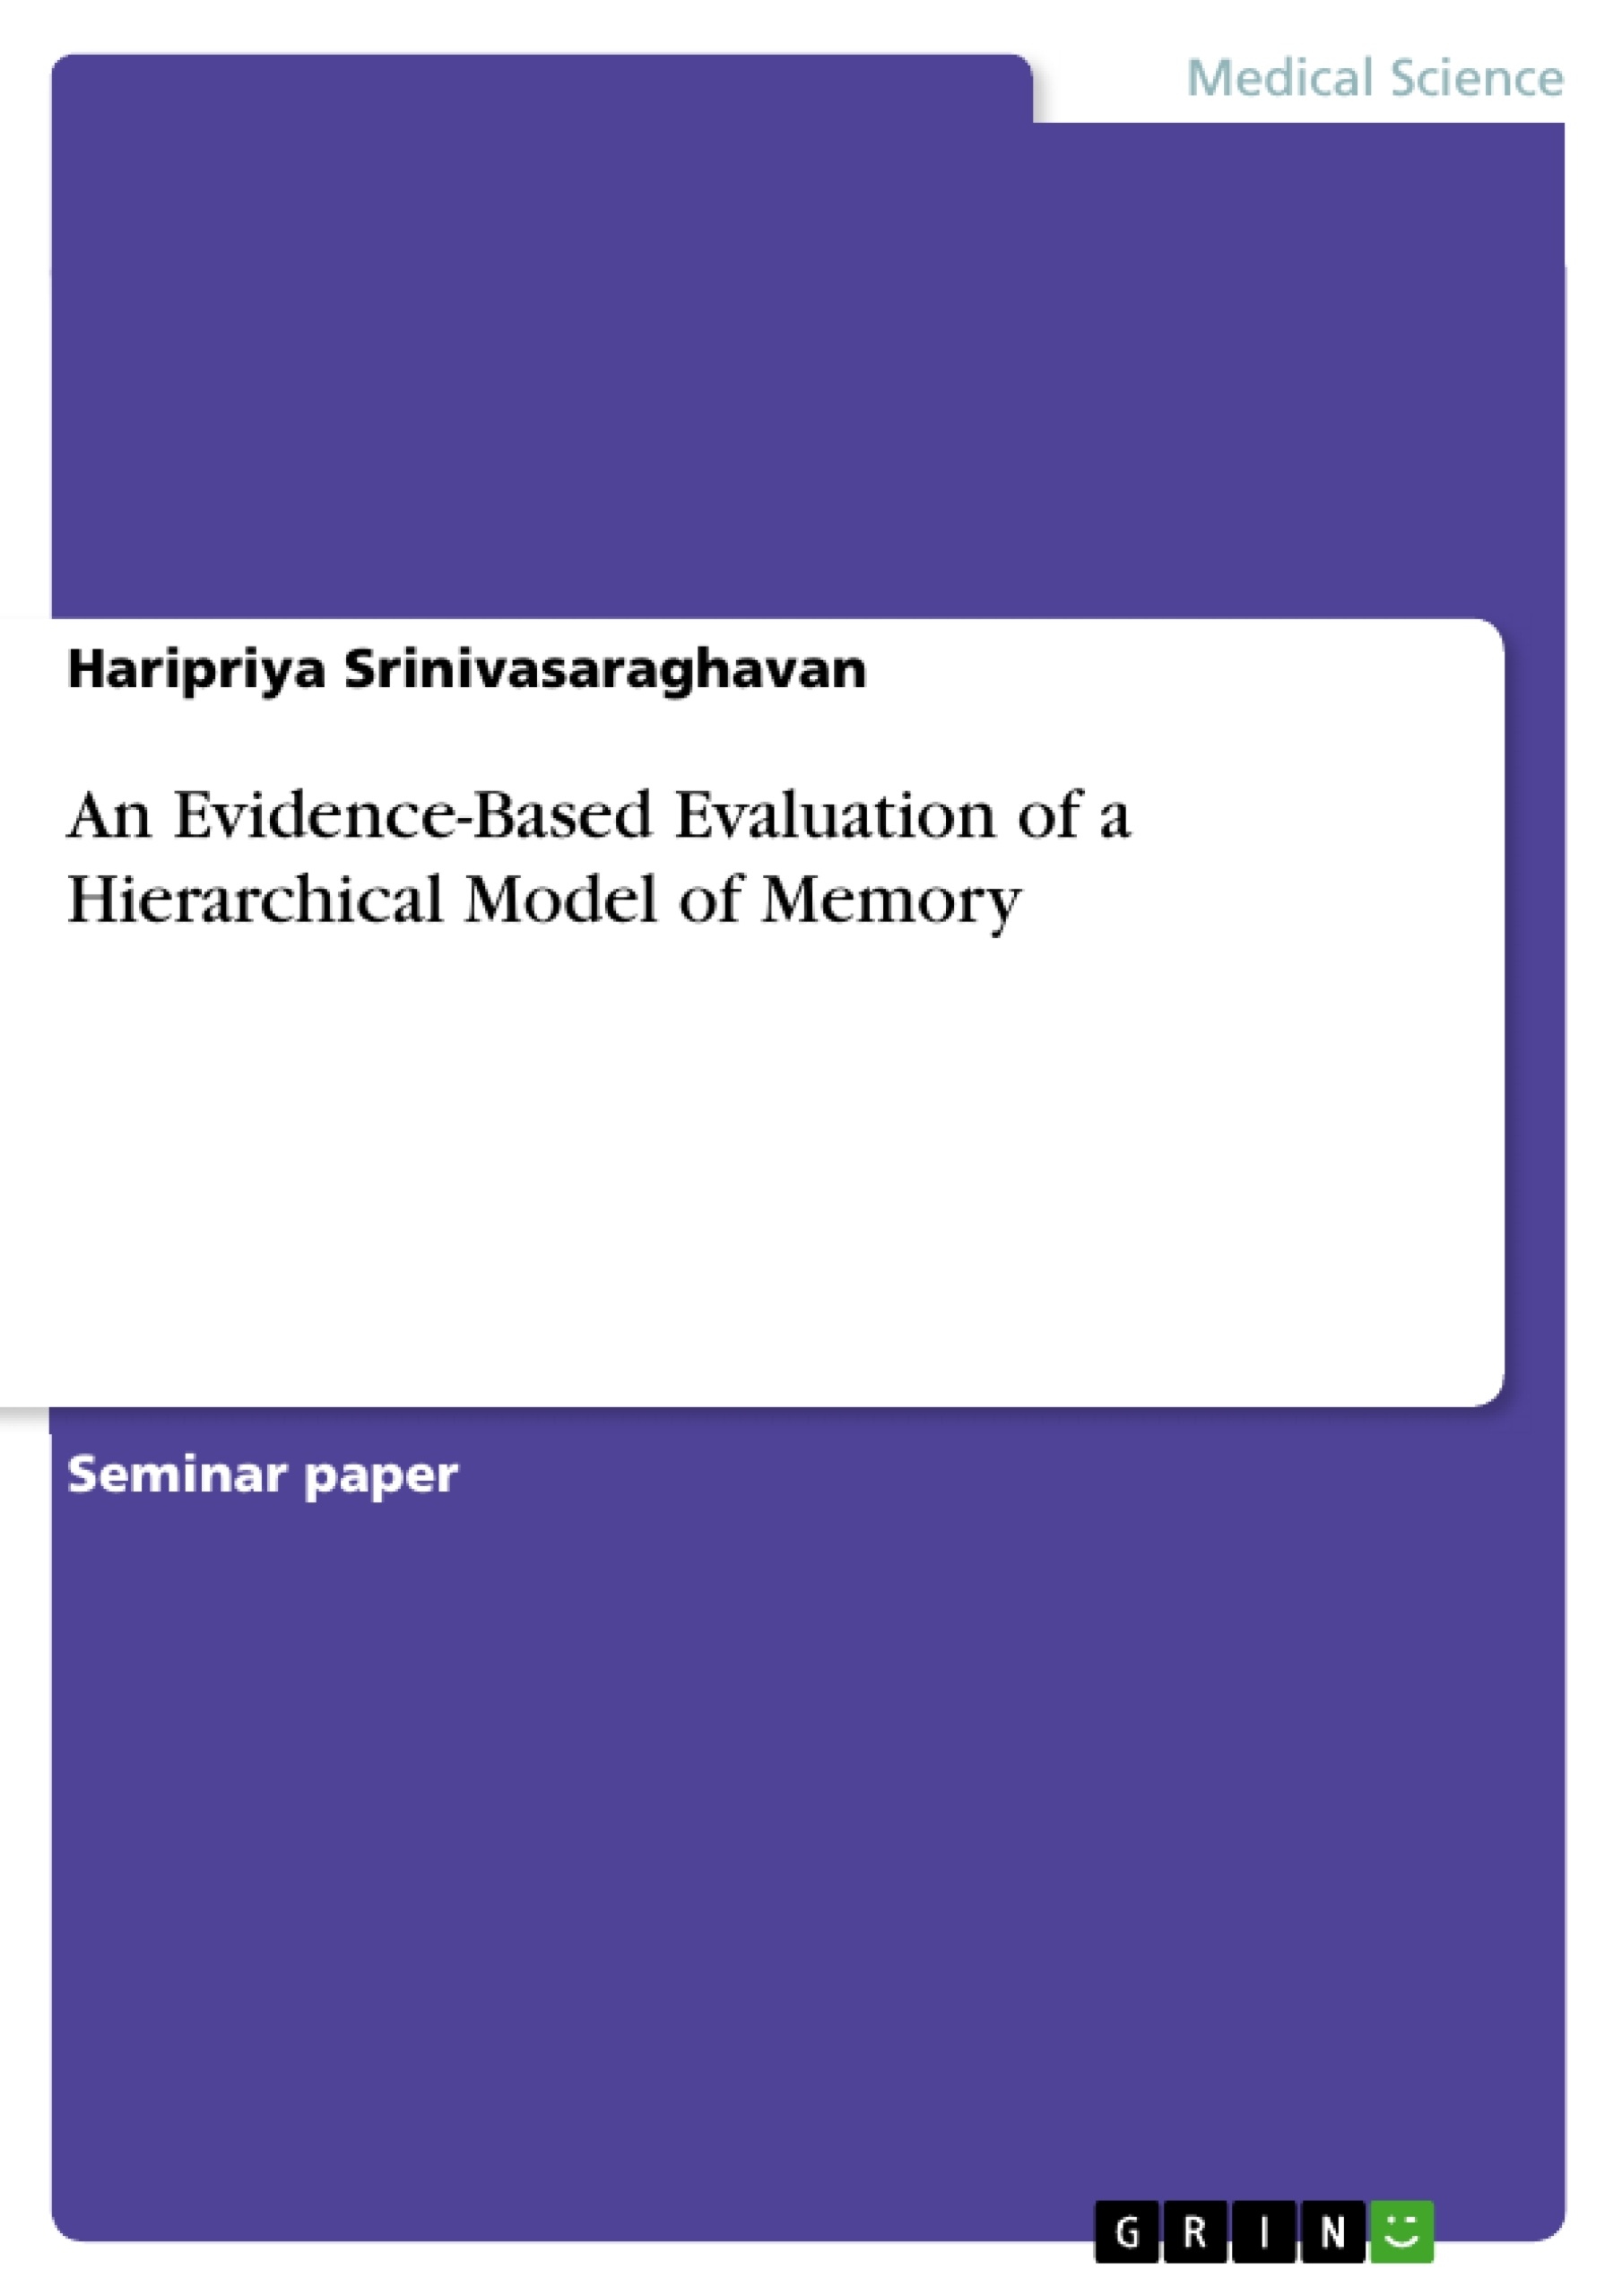 Title: An Evidence-Based Evaluation of a Hierarchical Model of Memory